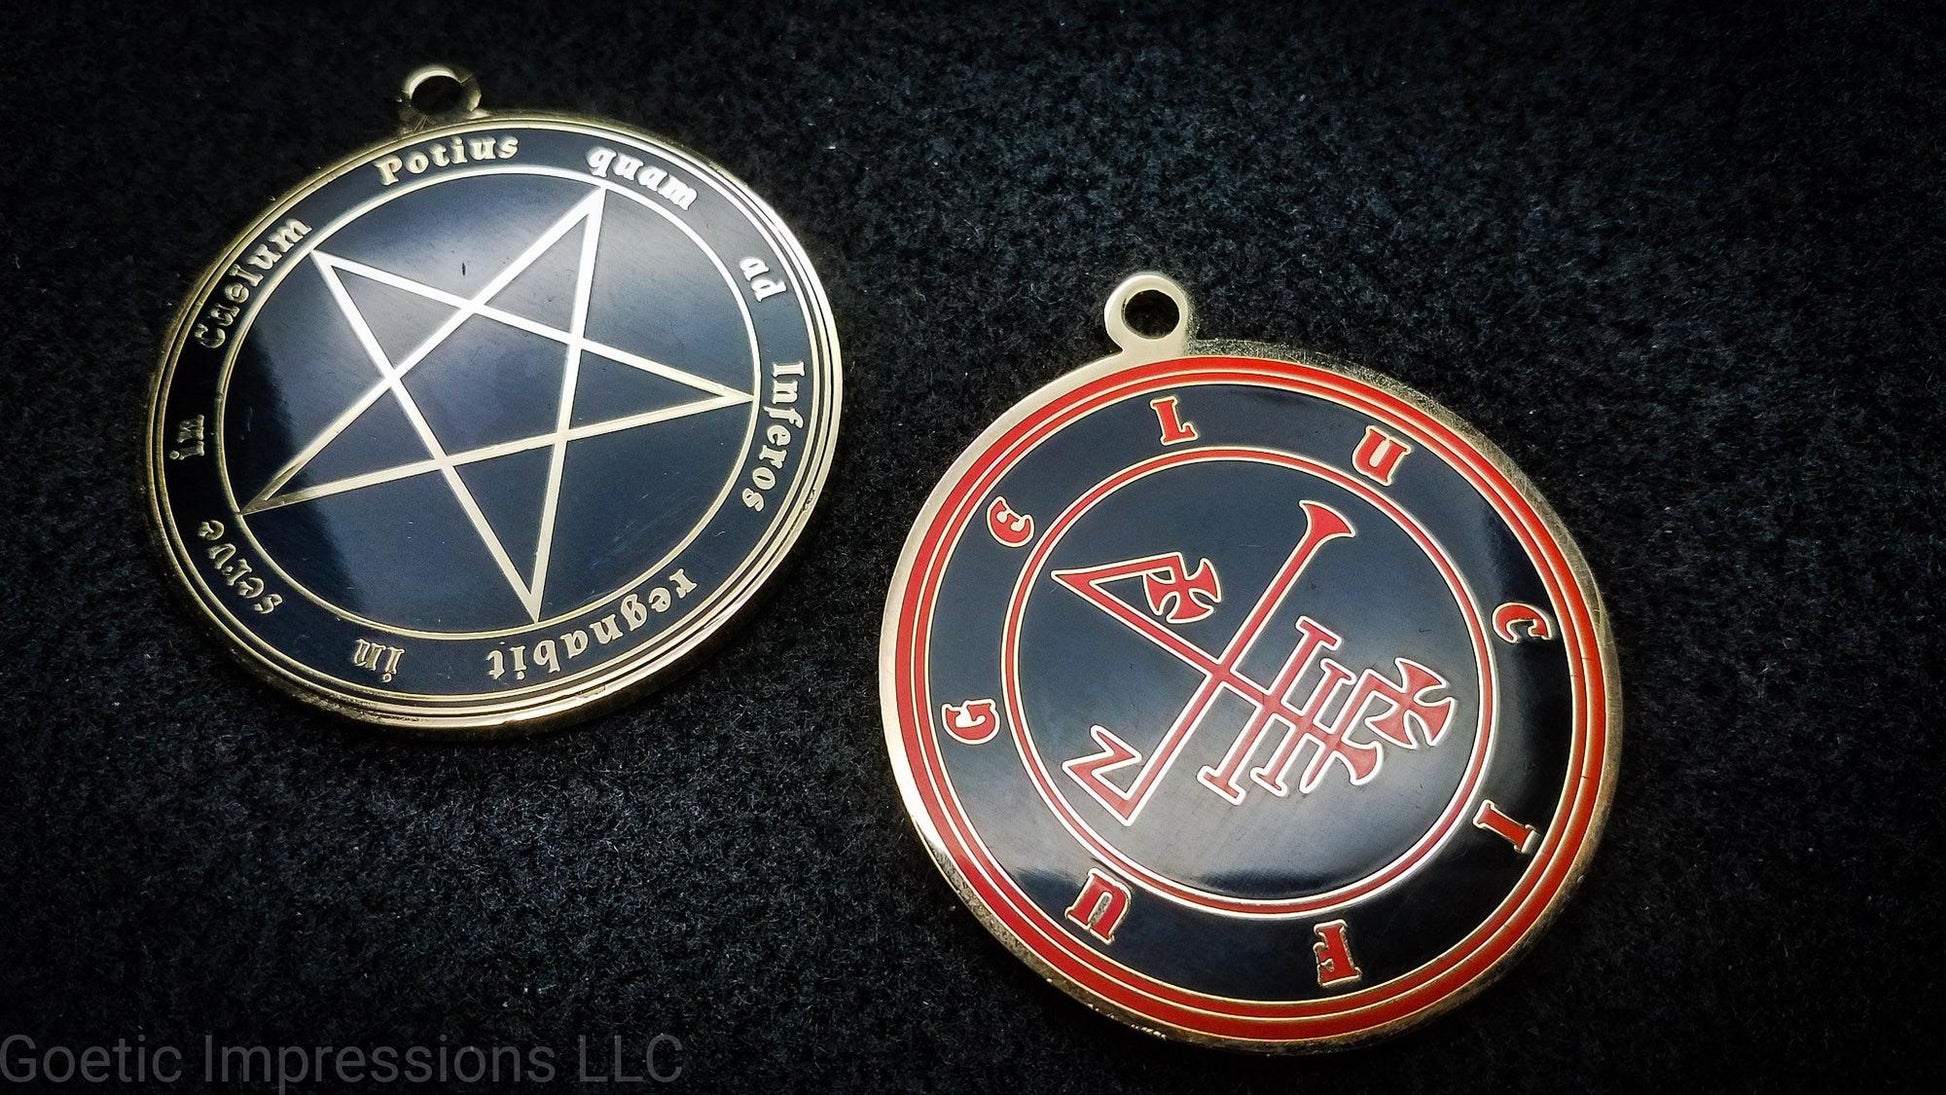 Lucifuge sigil ritual medallion with pentagram on reverse side. The reverse side of each Sigil medallion features the Latin phrase 'Potius quam ad Inferos regnabit in serve in Caelum' meaning, 'Better to rule in Hell than to serve in Heaven'.